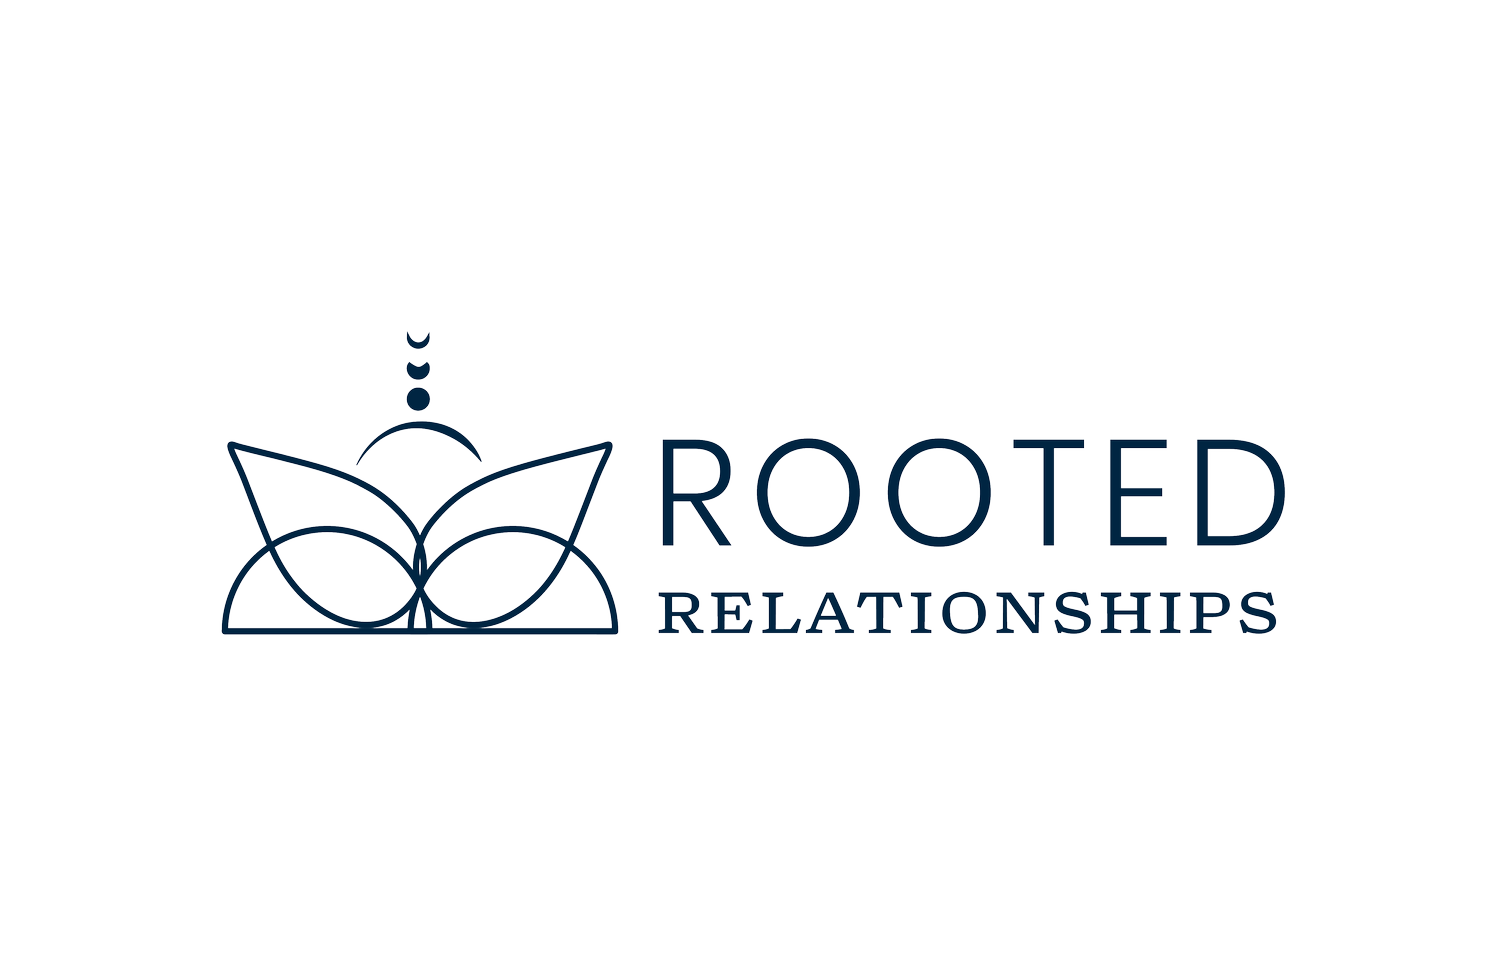 Growth and change with Mallika Bush | Rooted Relationships